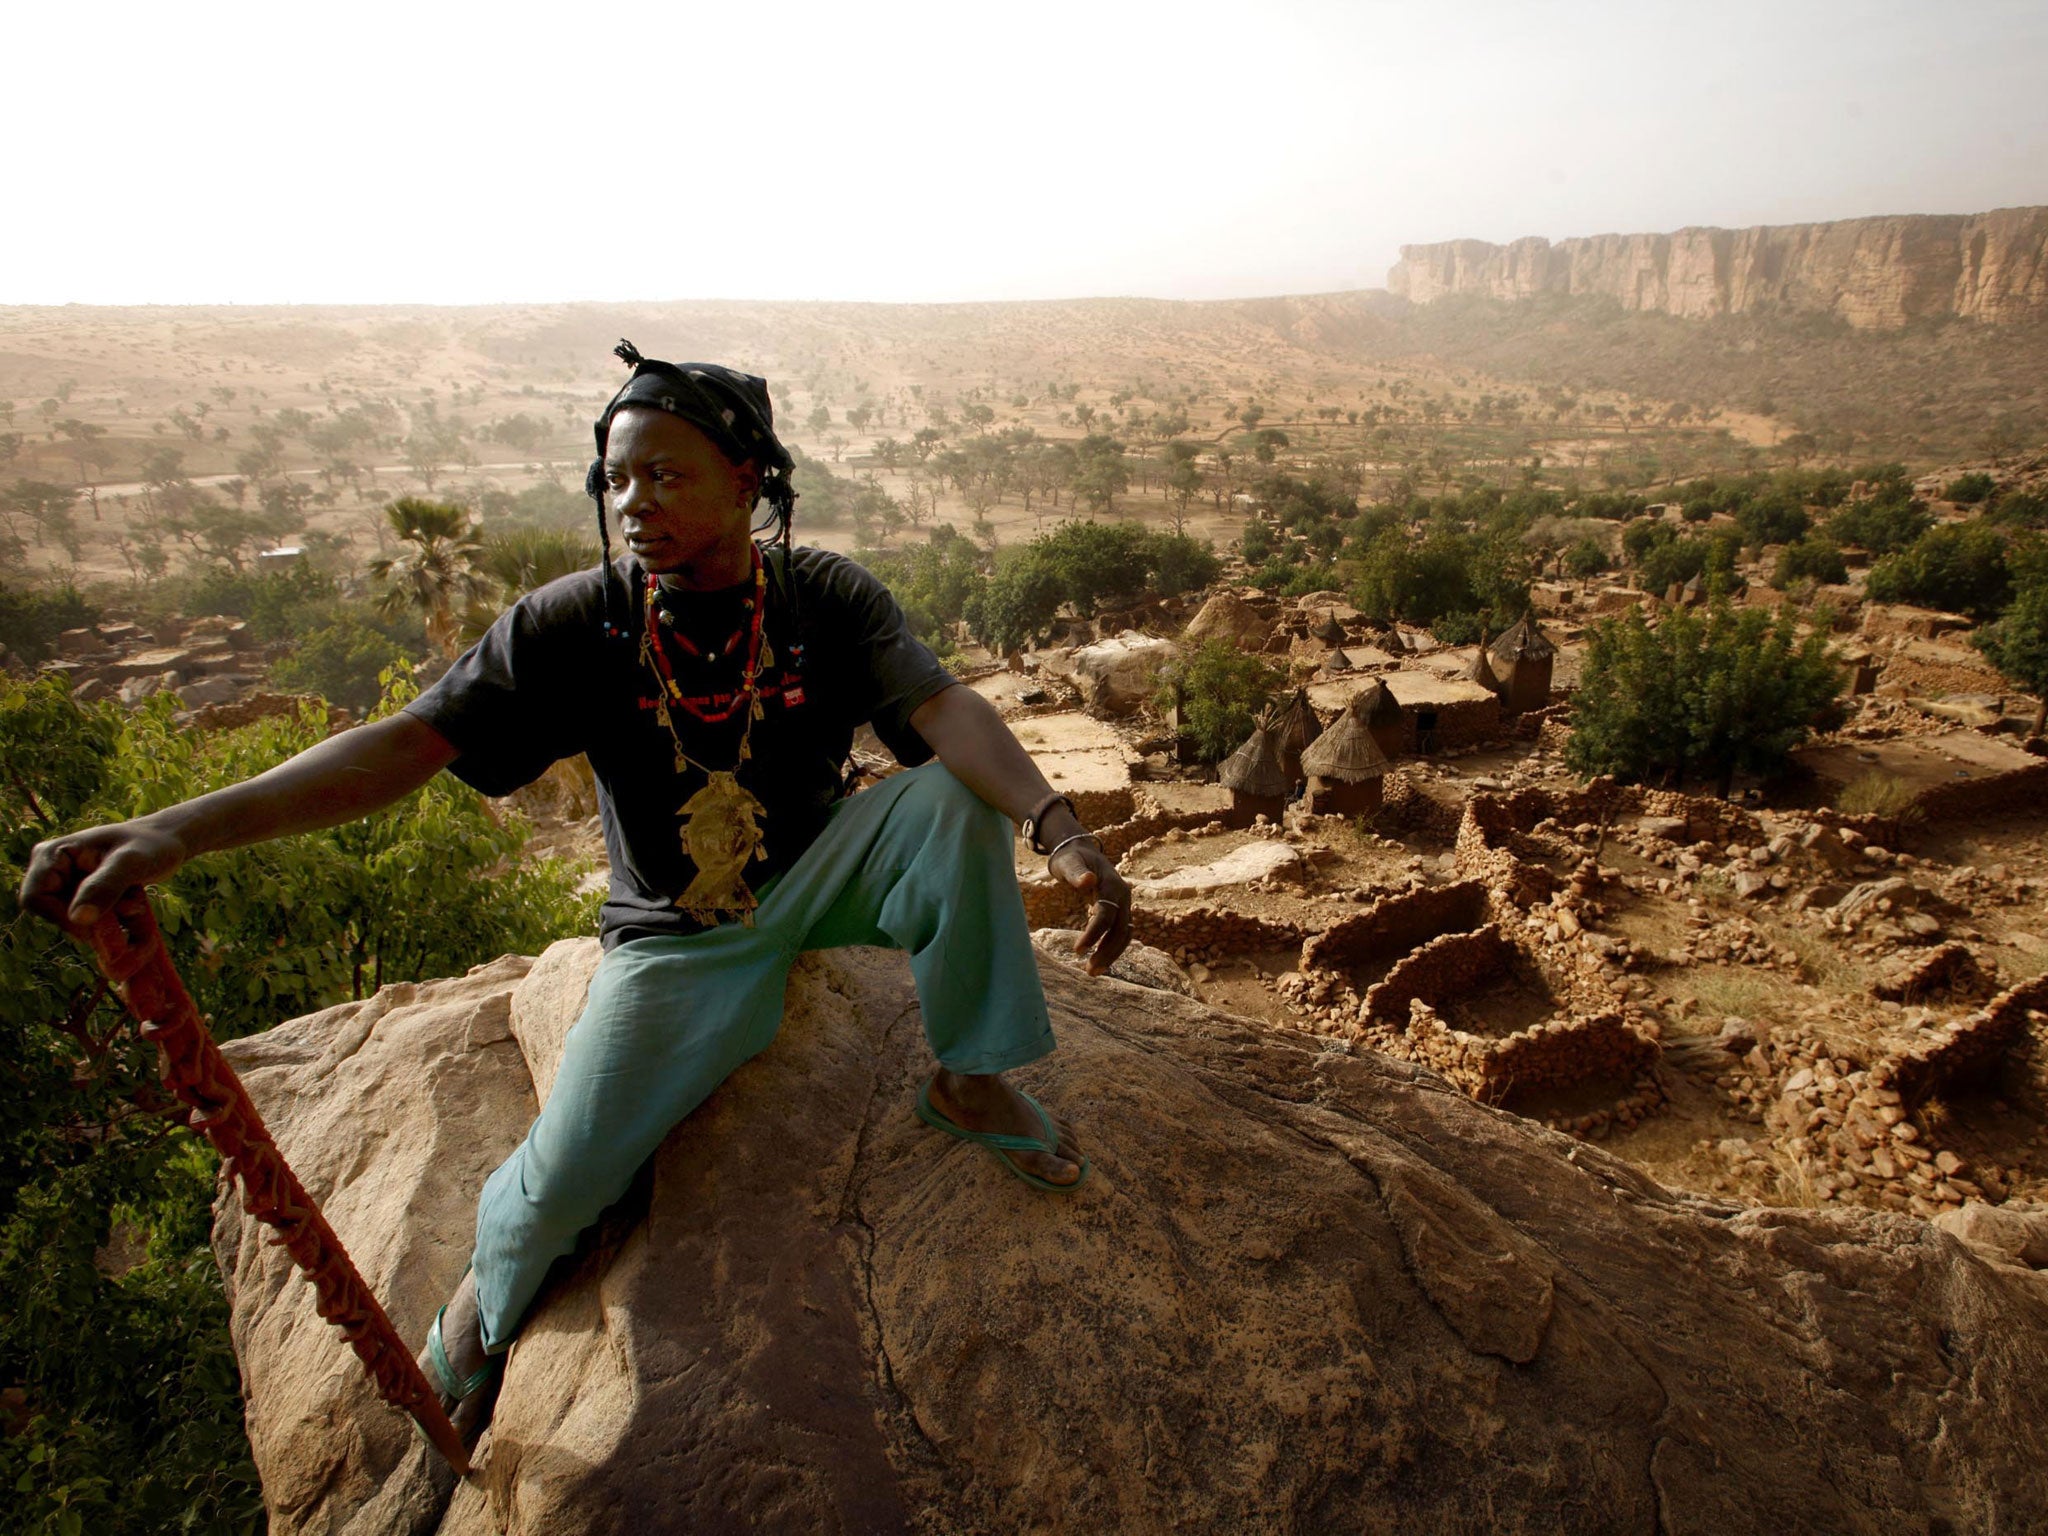 A member of the Dogon tribe above the Malian village of Nomburi